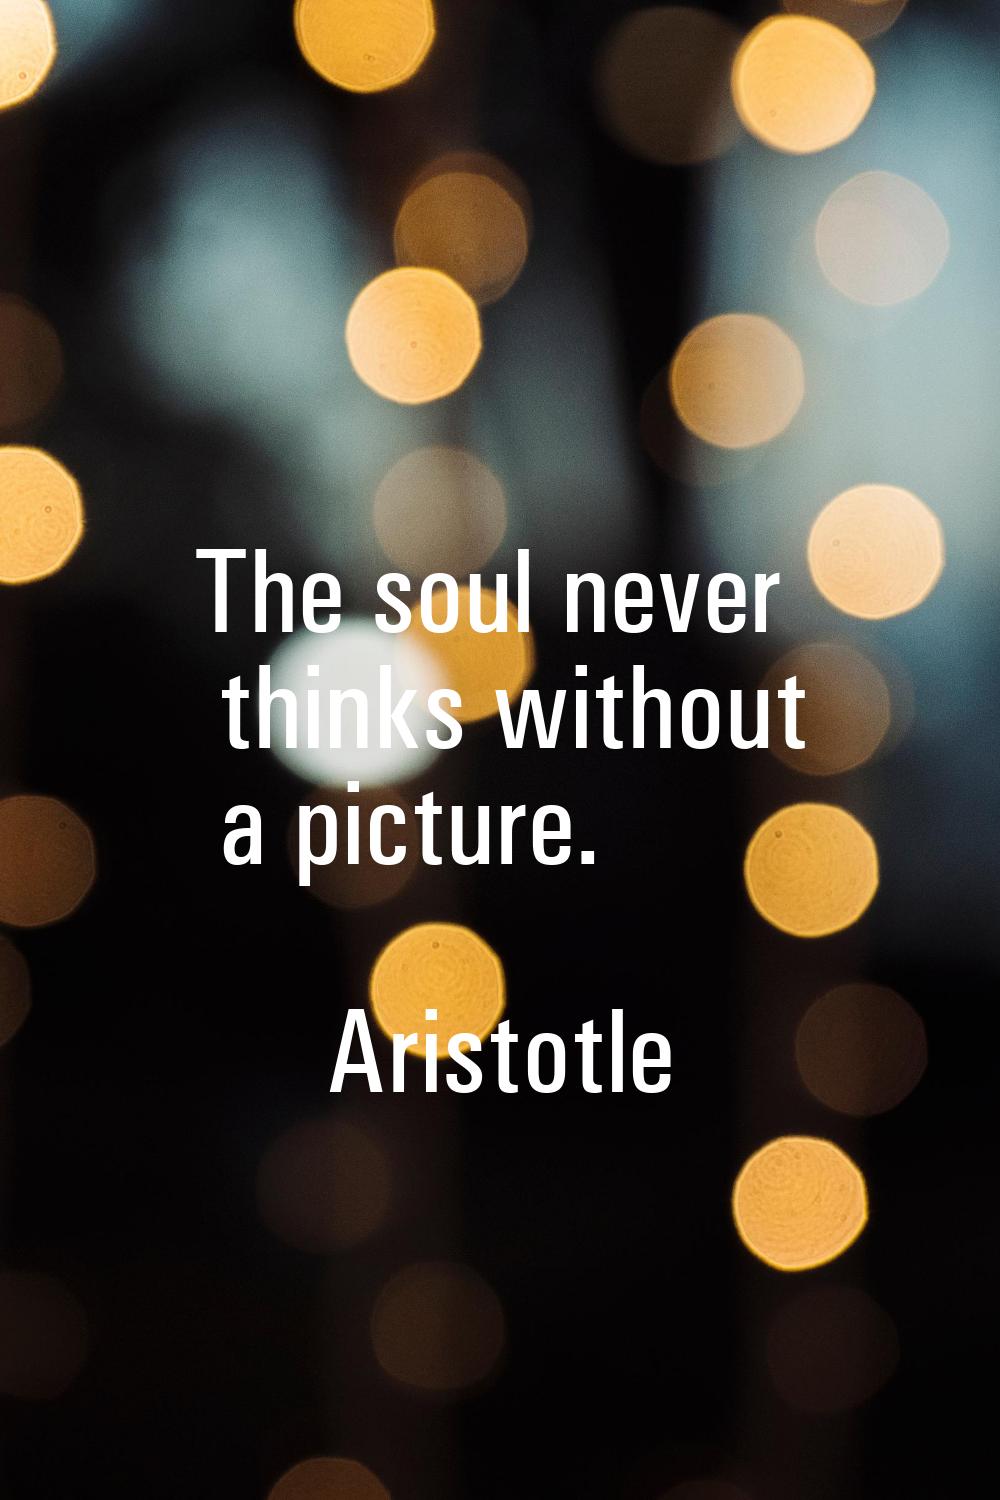 The soul never thinks without a picture.